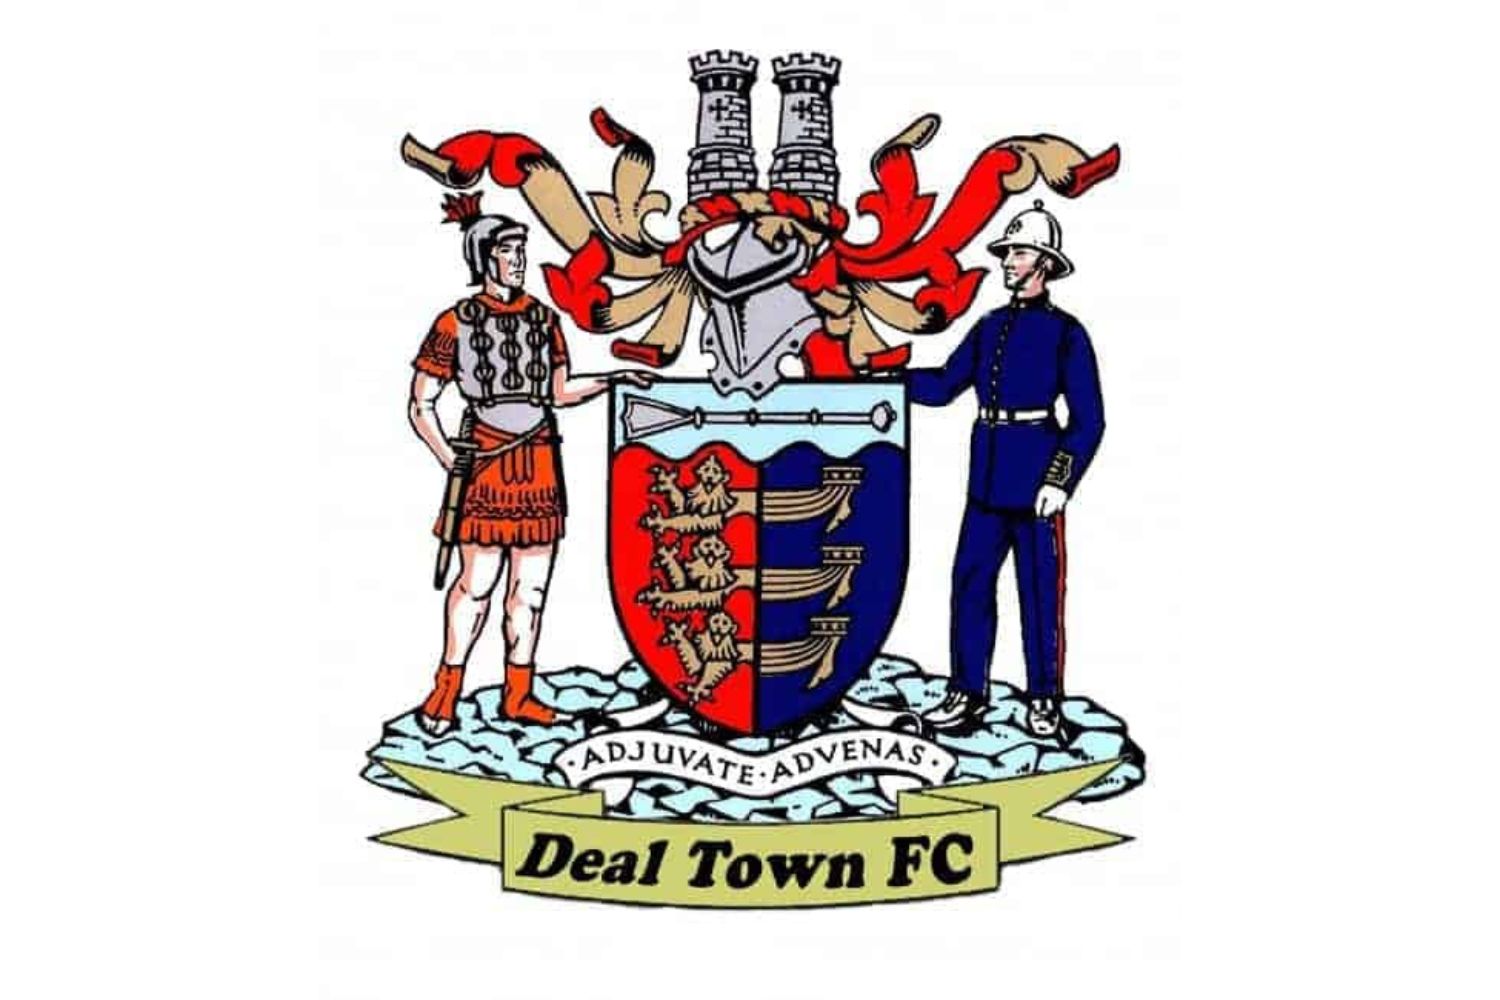 Deal Town FC: 14 Football Club Facts 